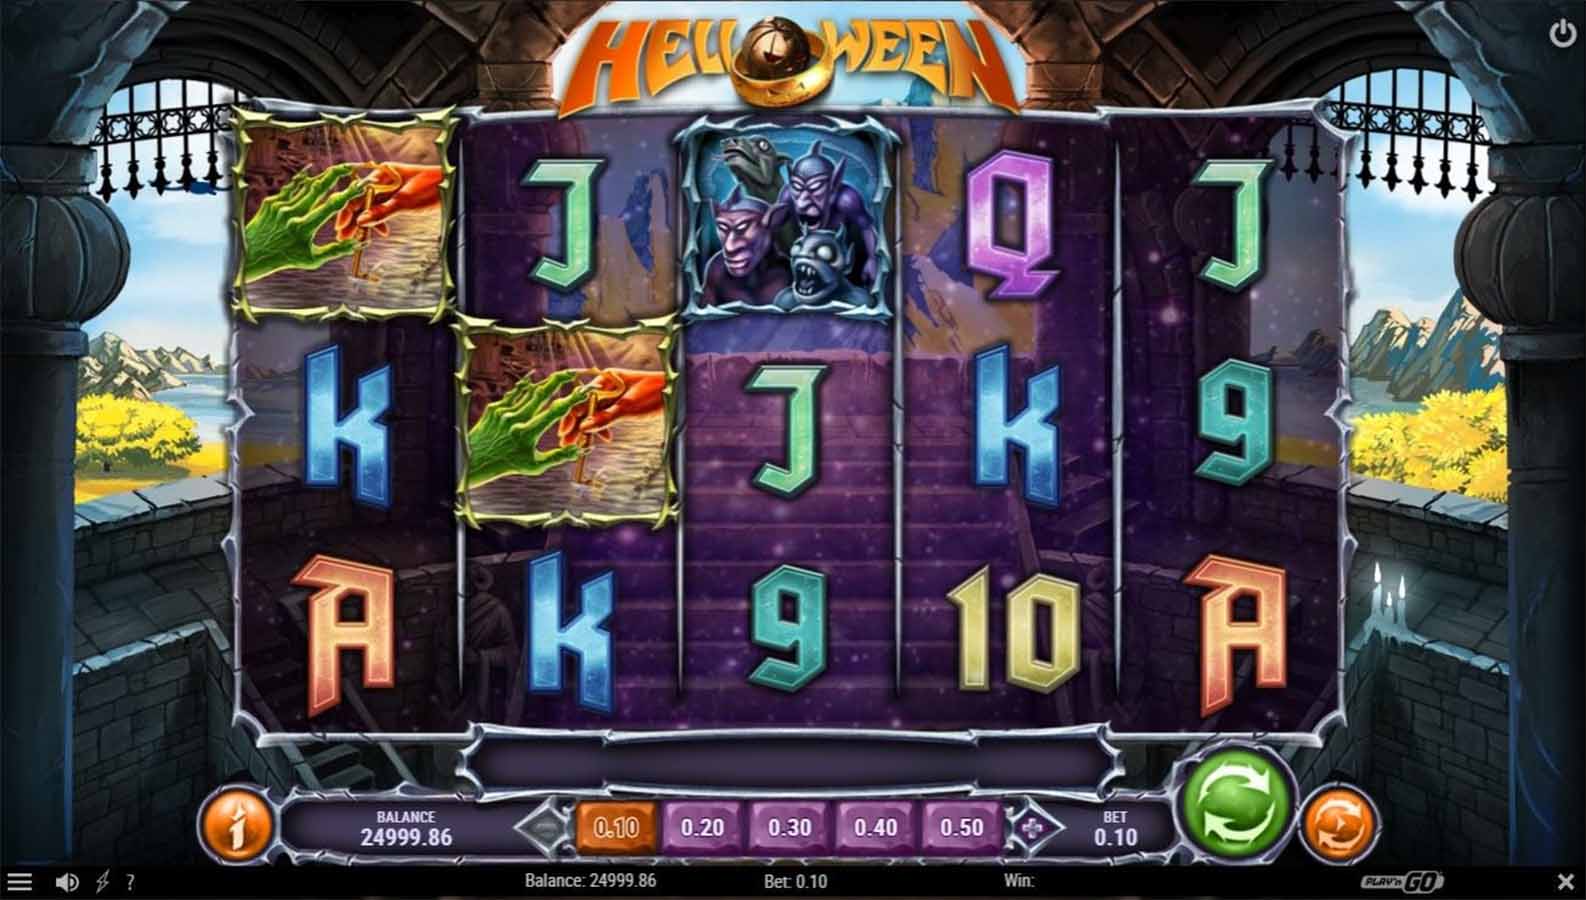 Helloween - 96.2% payout